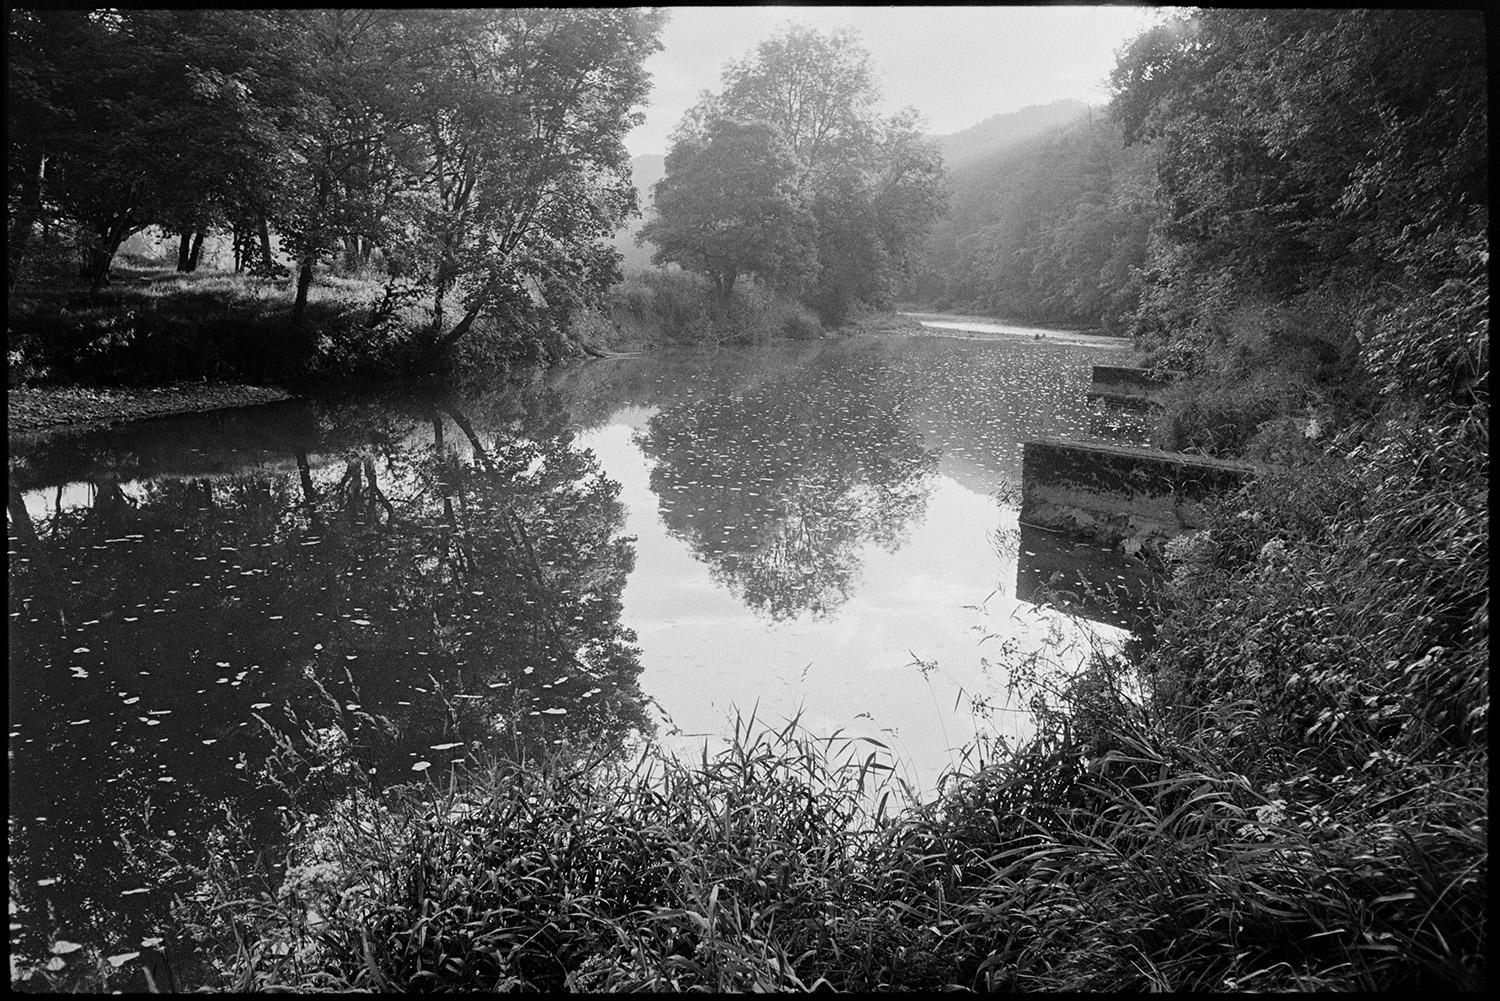 River misty early reflections. 
[The River Torridge running past tree and woodland at Halsdon, Dolton. The trees are reflected in the river.]